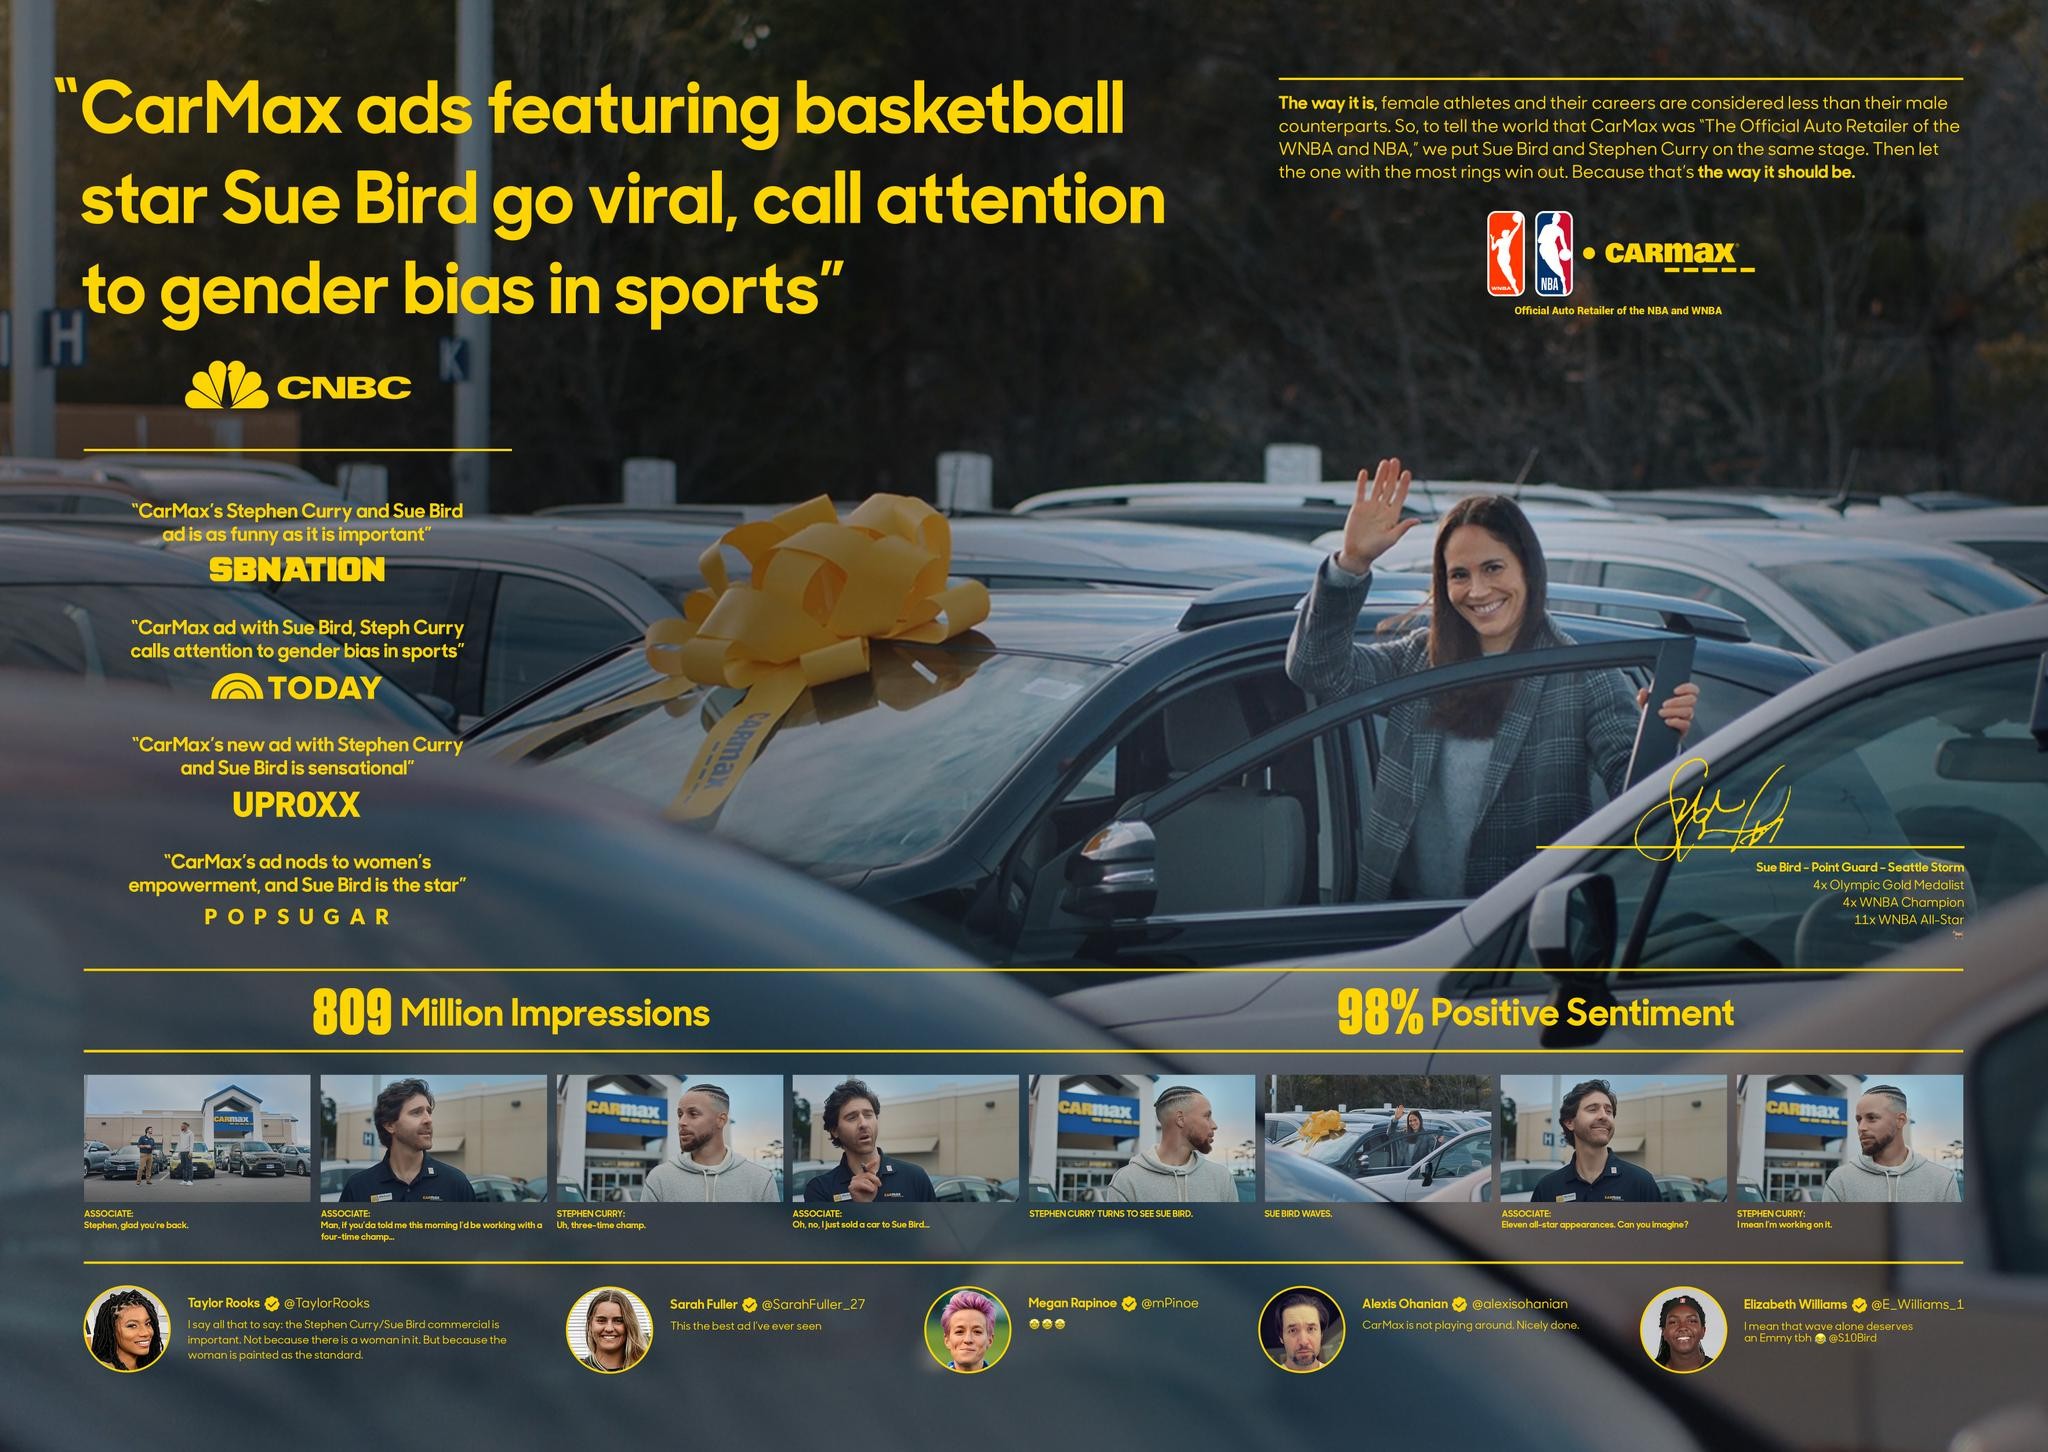 “Pinch Me” Featuring Sue Bird and Stephen Curry for CarMax